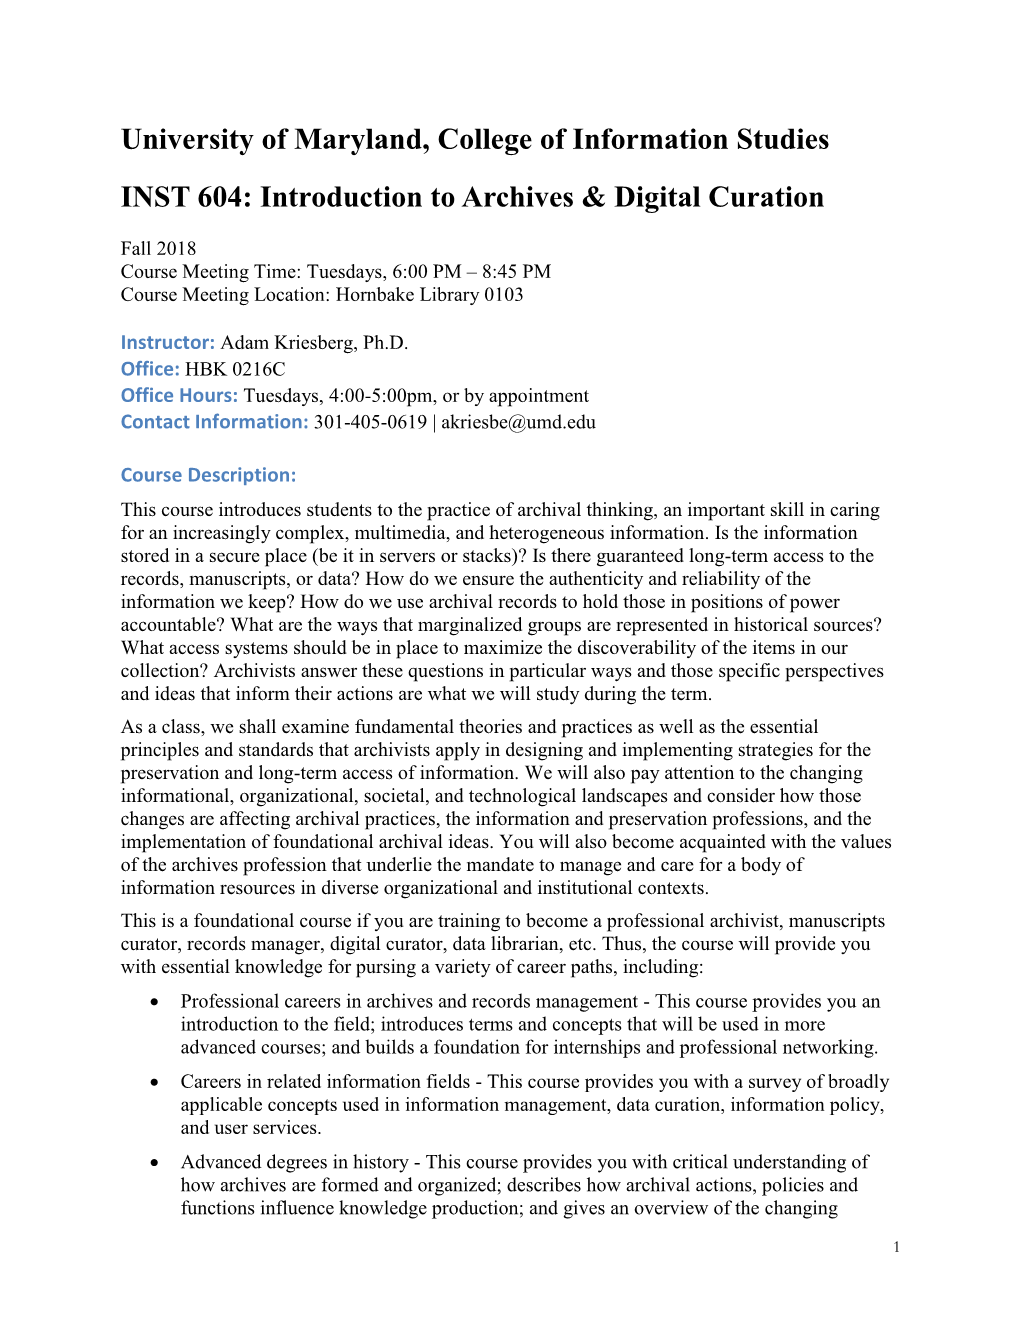 Introduction to Archives & Digital Curation